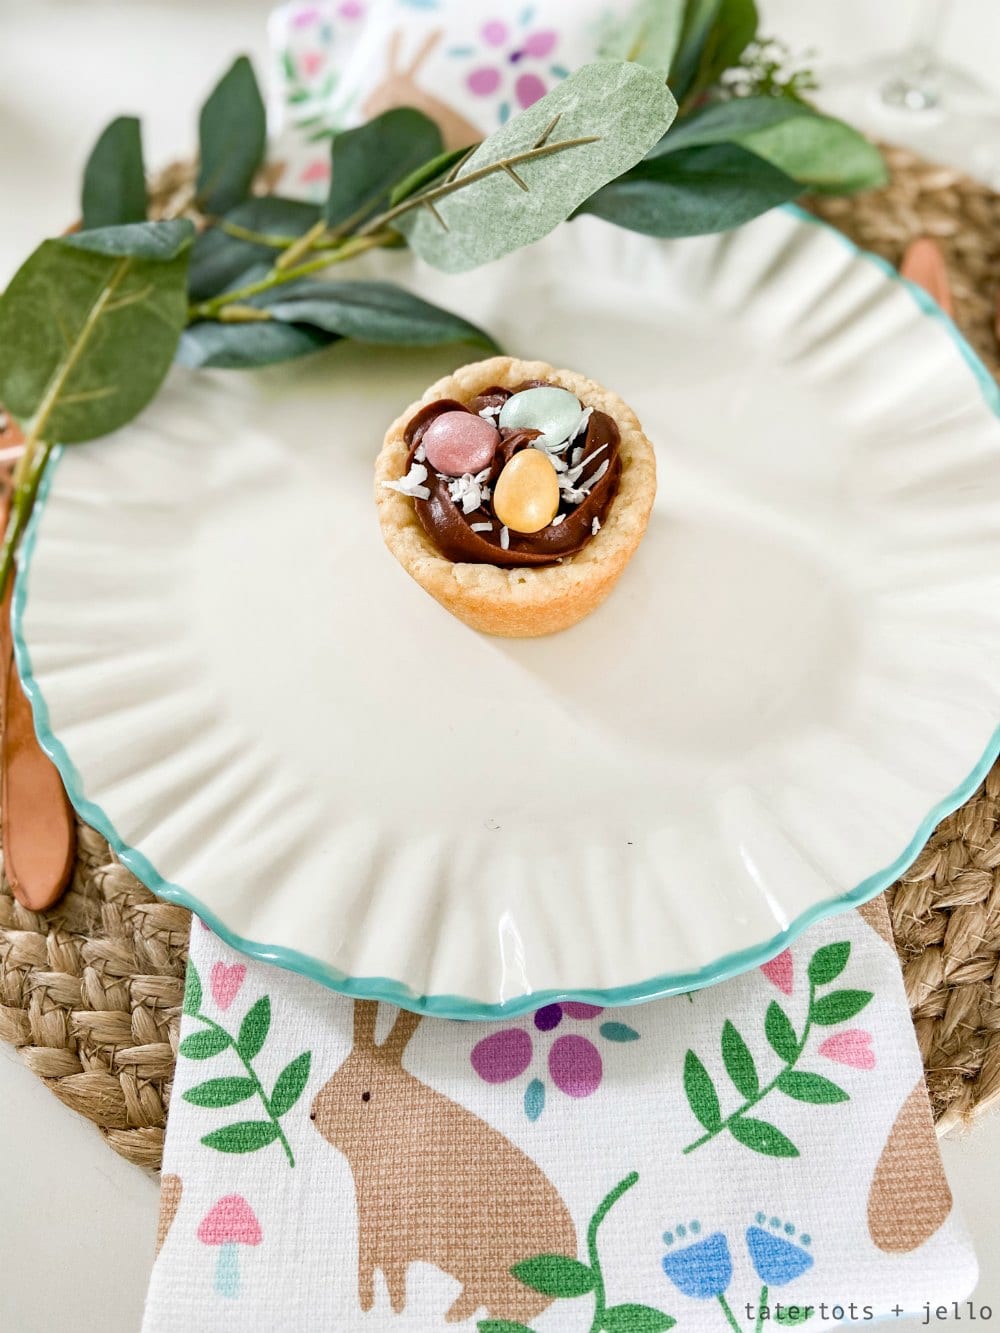 Bird's Nest Cookie Cups are fun to make and are the perfect dessert to make for Spring or Easter. Make them with your kids in three easy steps!